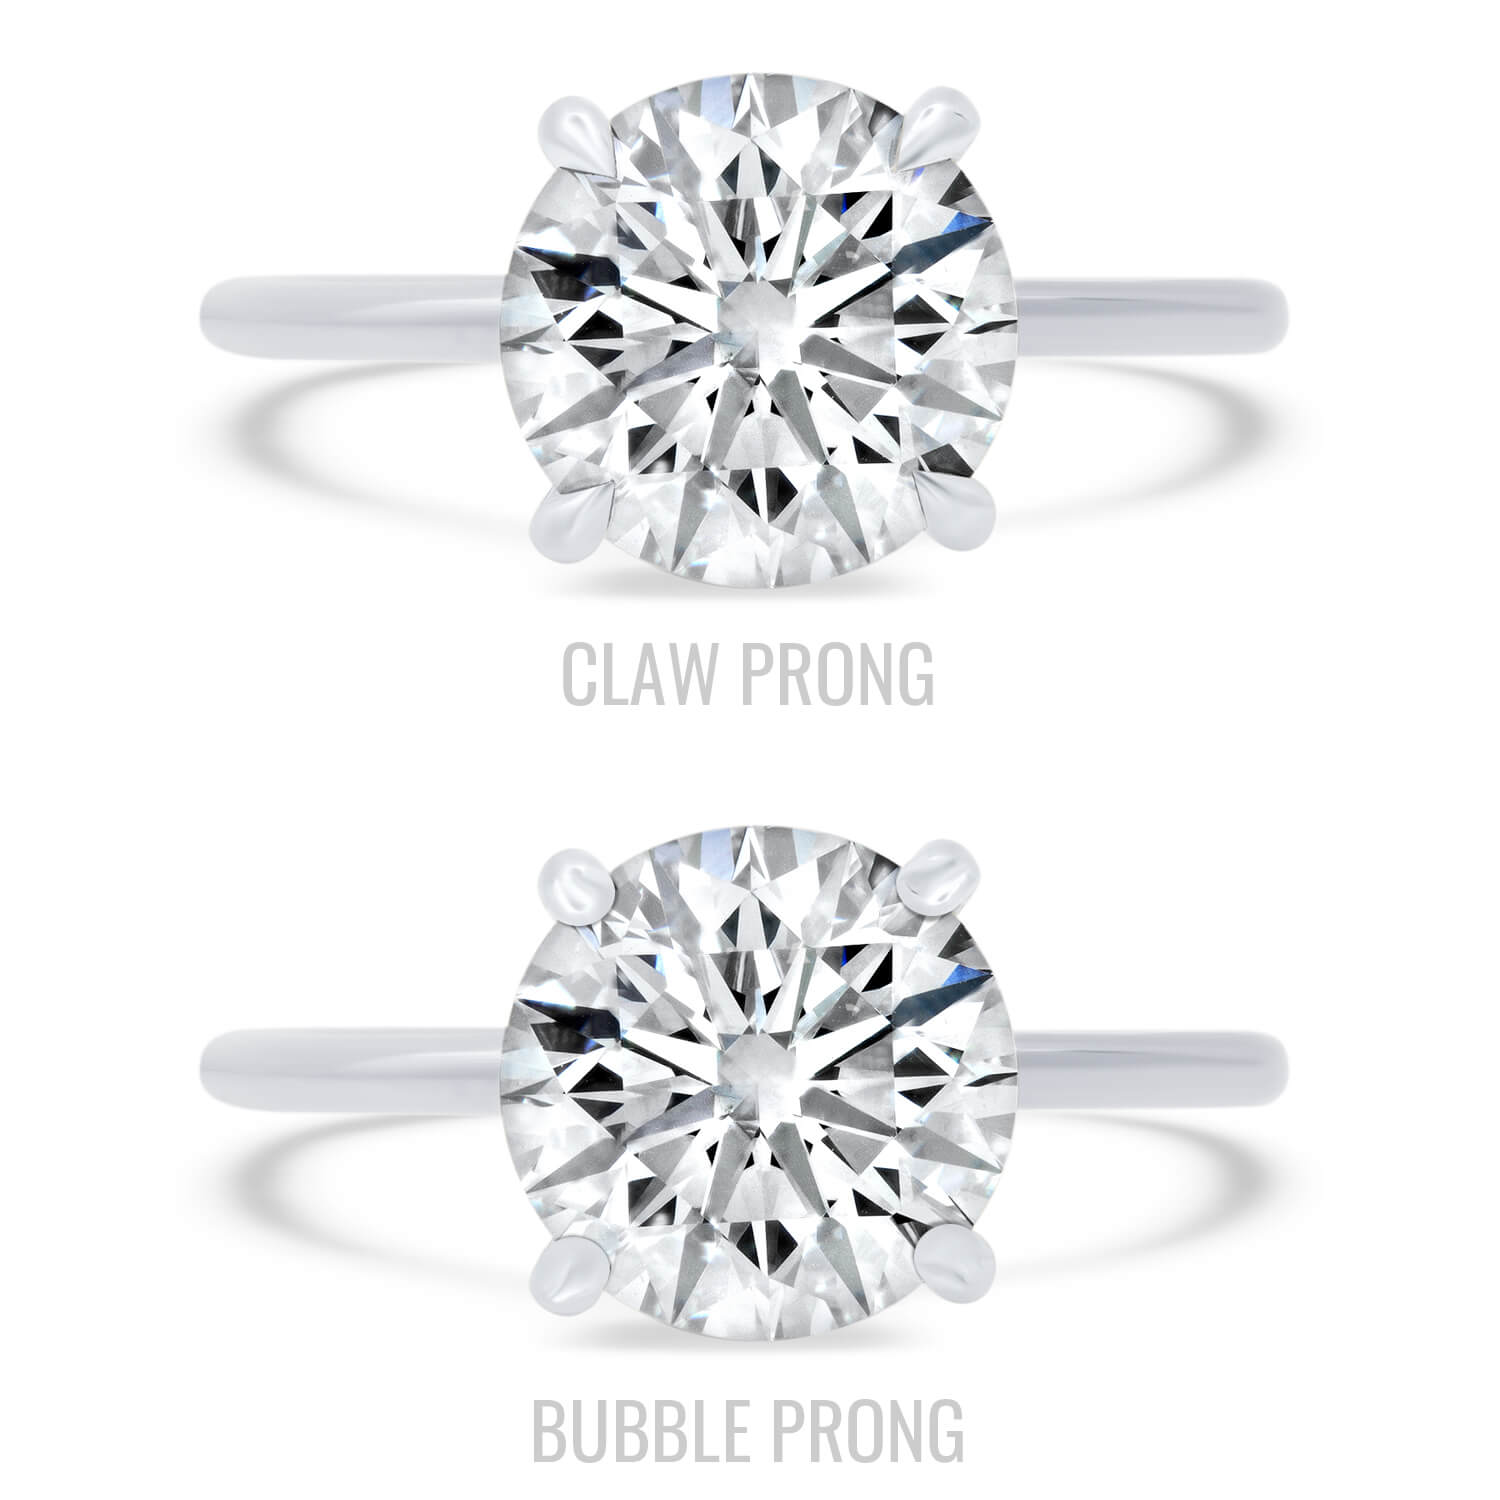 Engagement Ring Claw Prongs versus Bubble Prongs